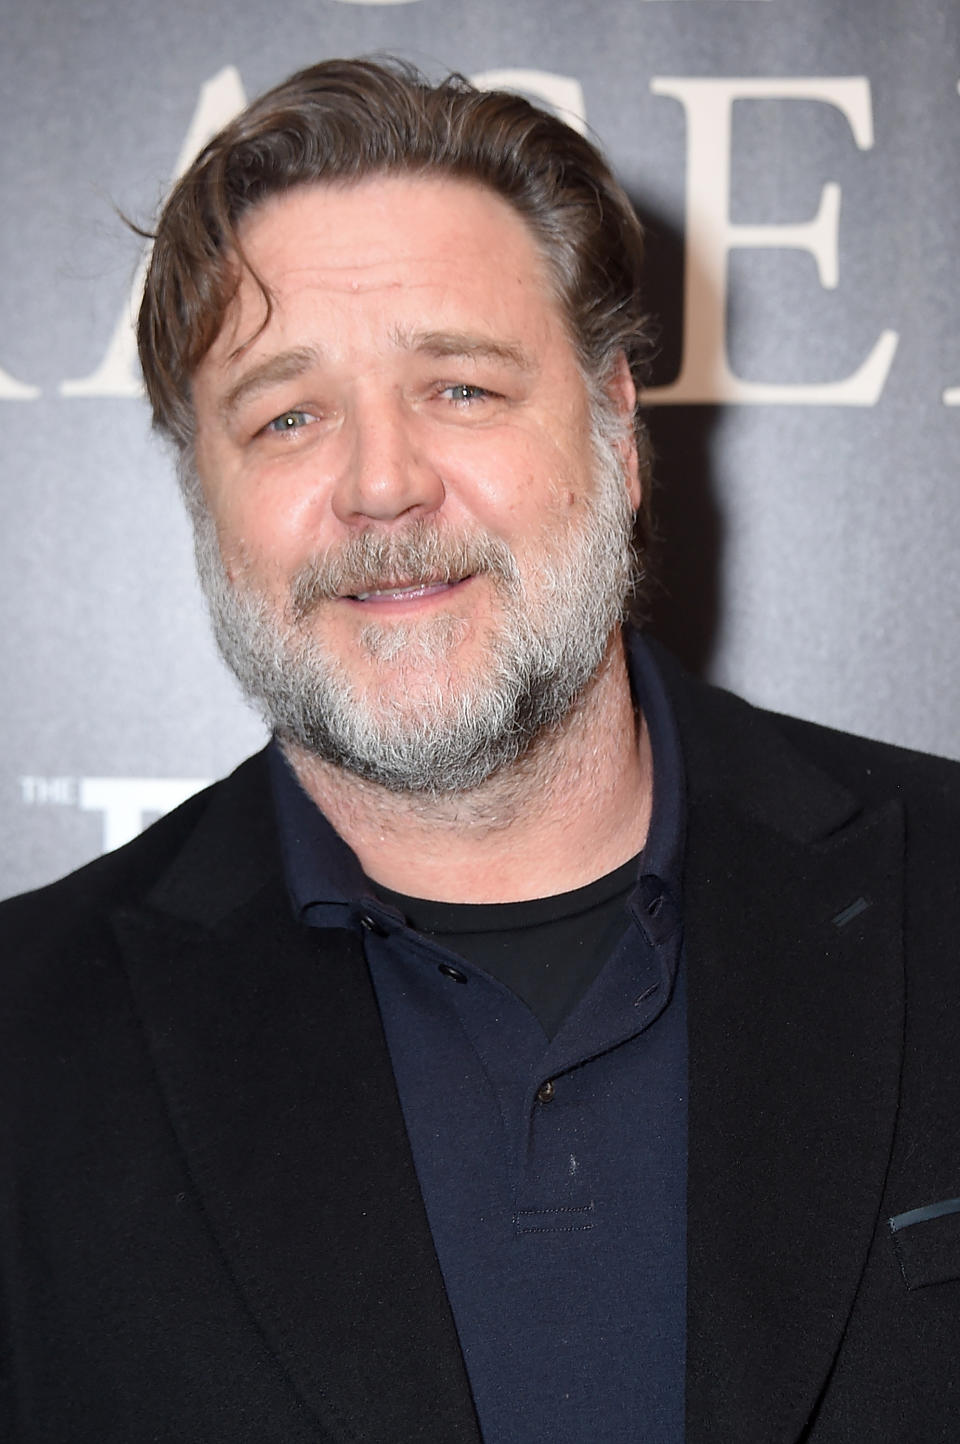 Russell crowe at the Whitby Hotel on October 22, 2018 in New York City.